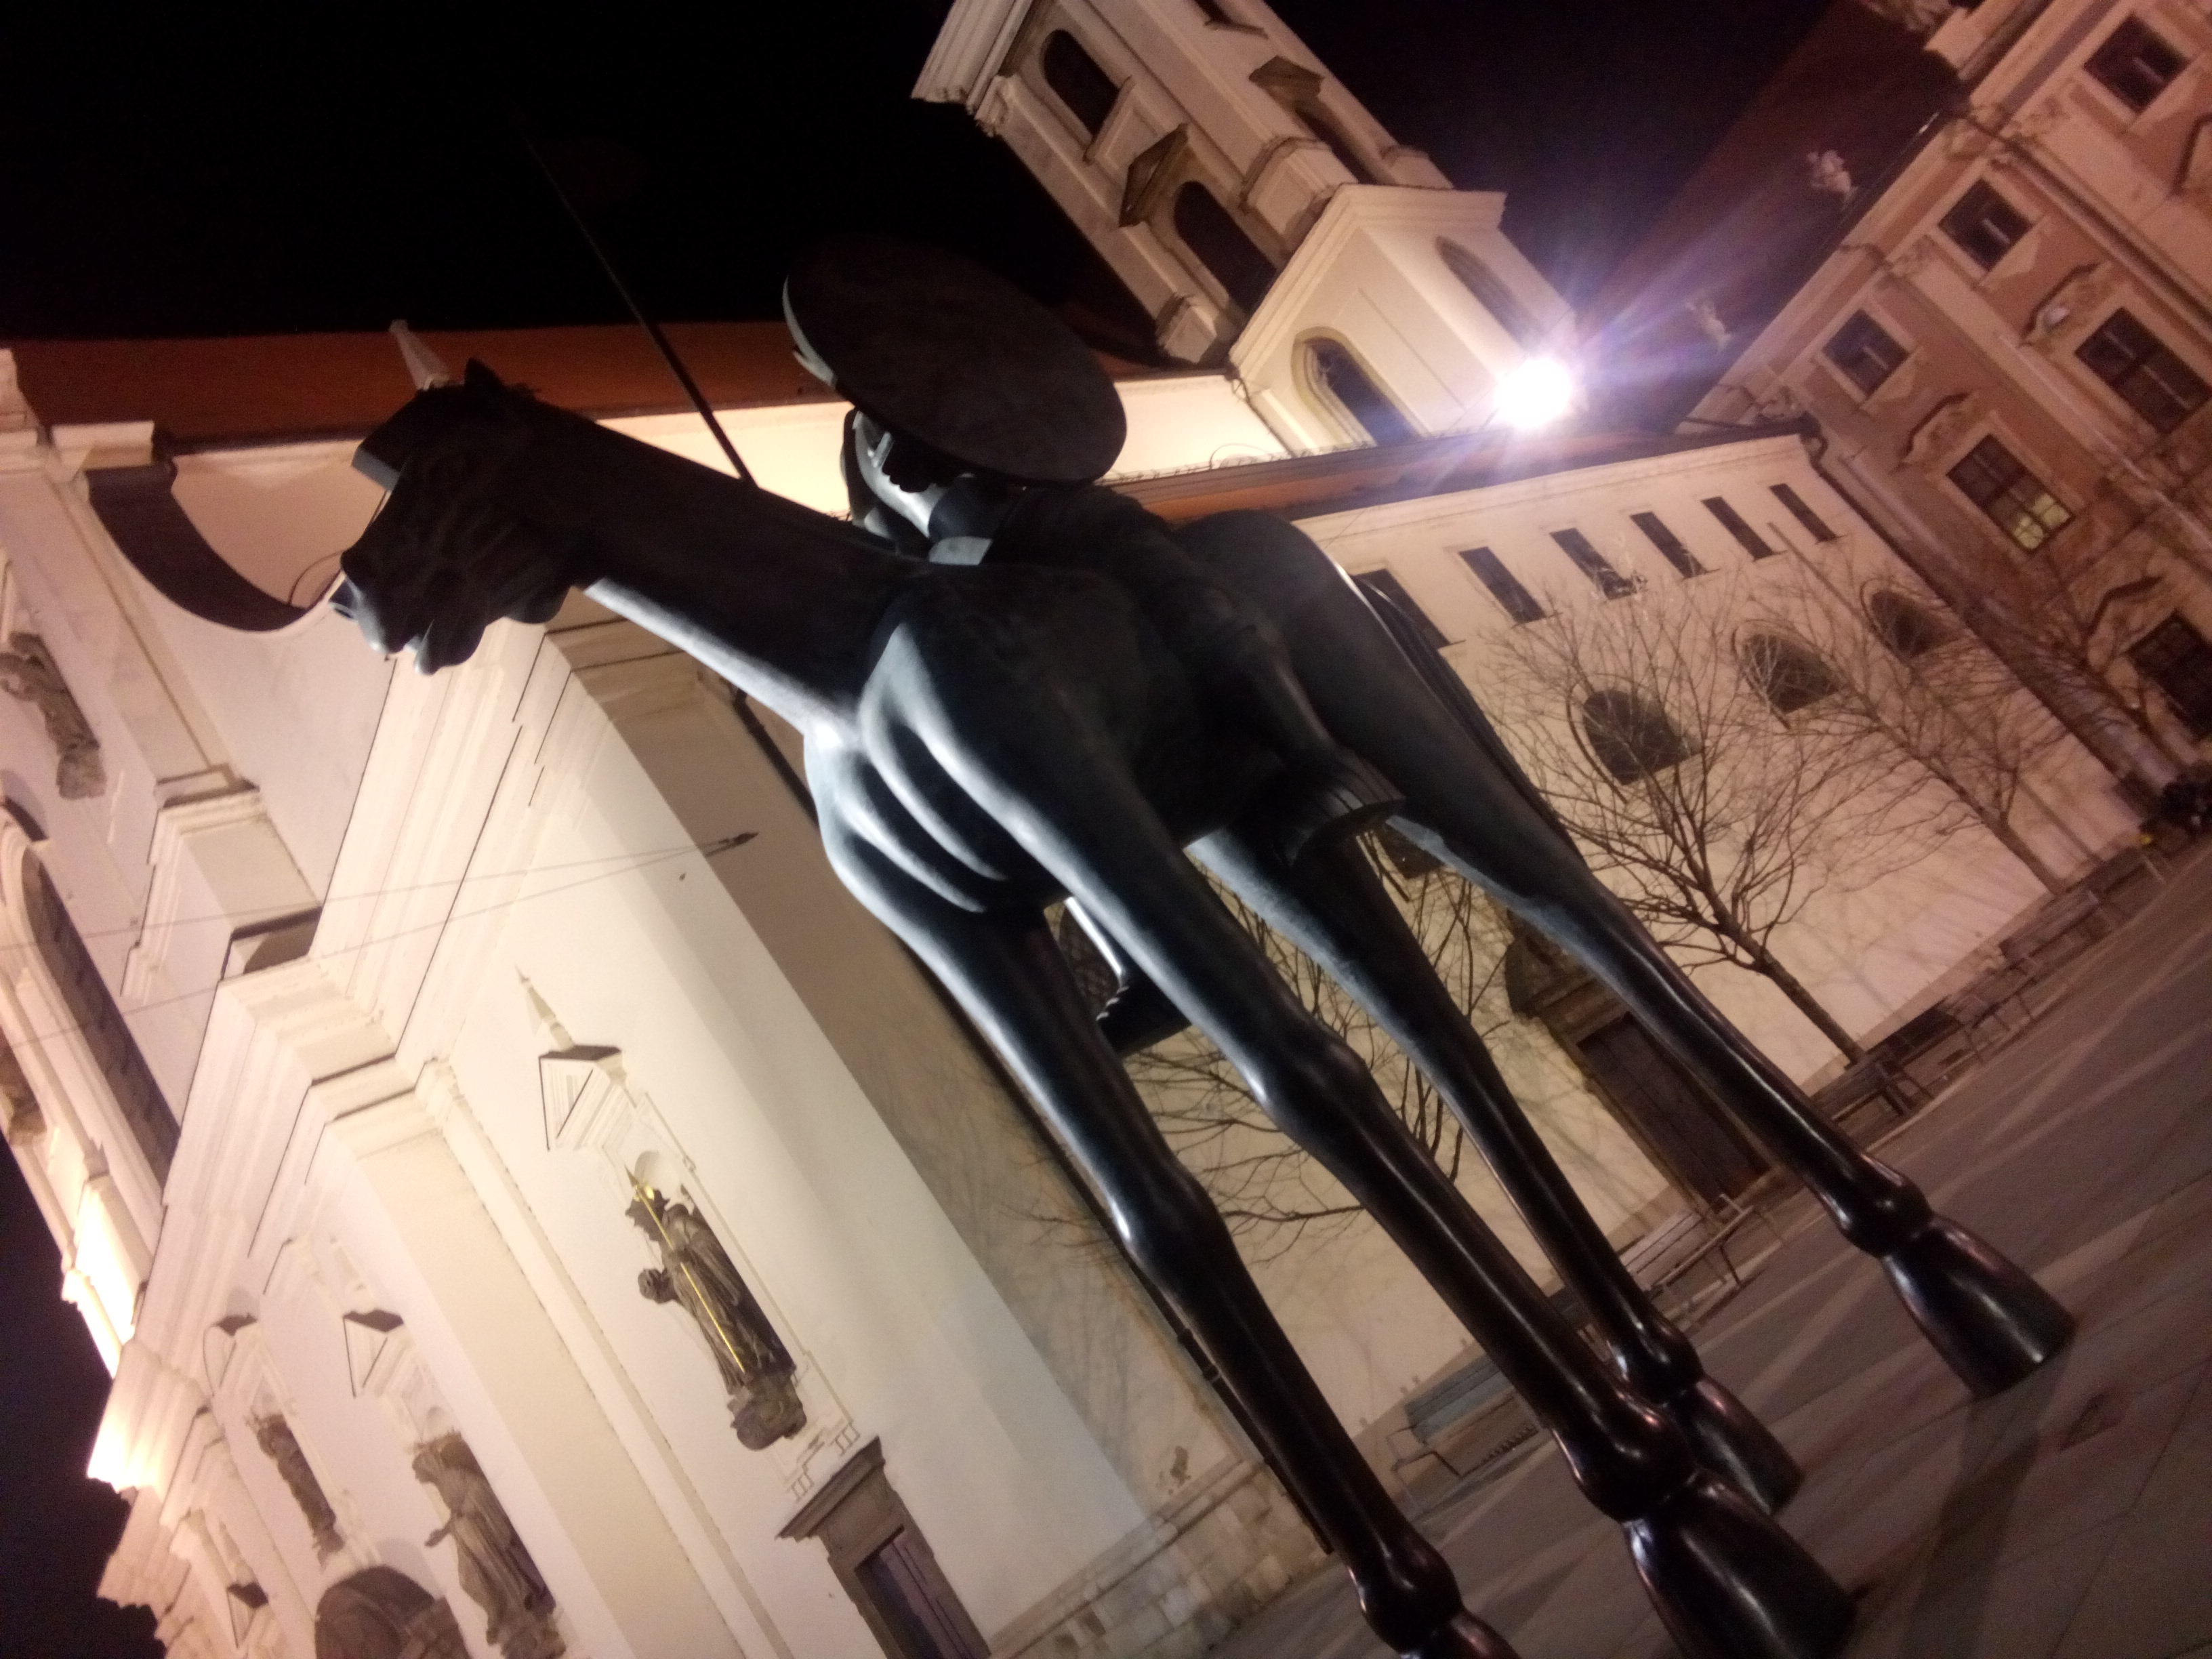 A statue of a black horse with extra long legs, in front of a white church